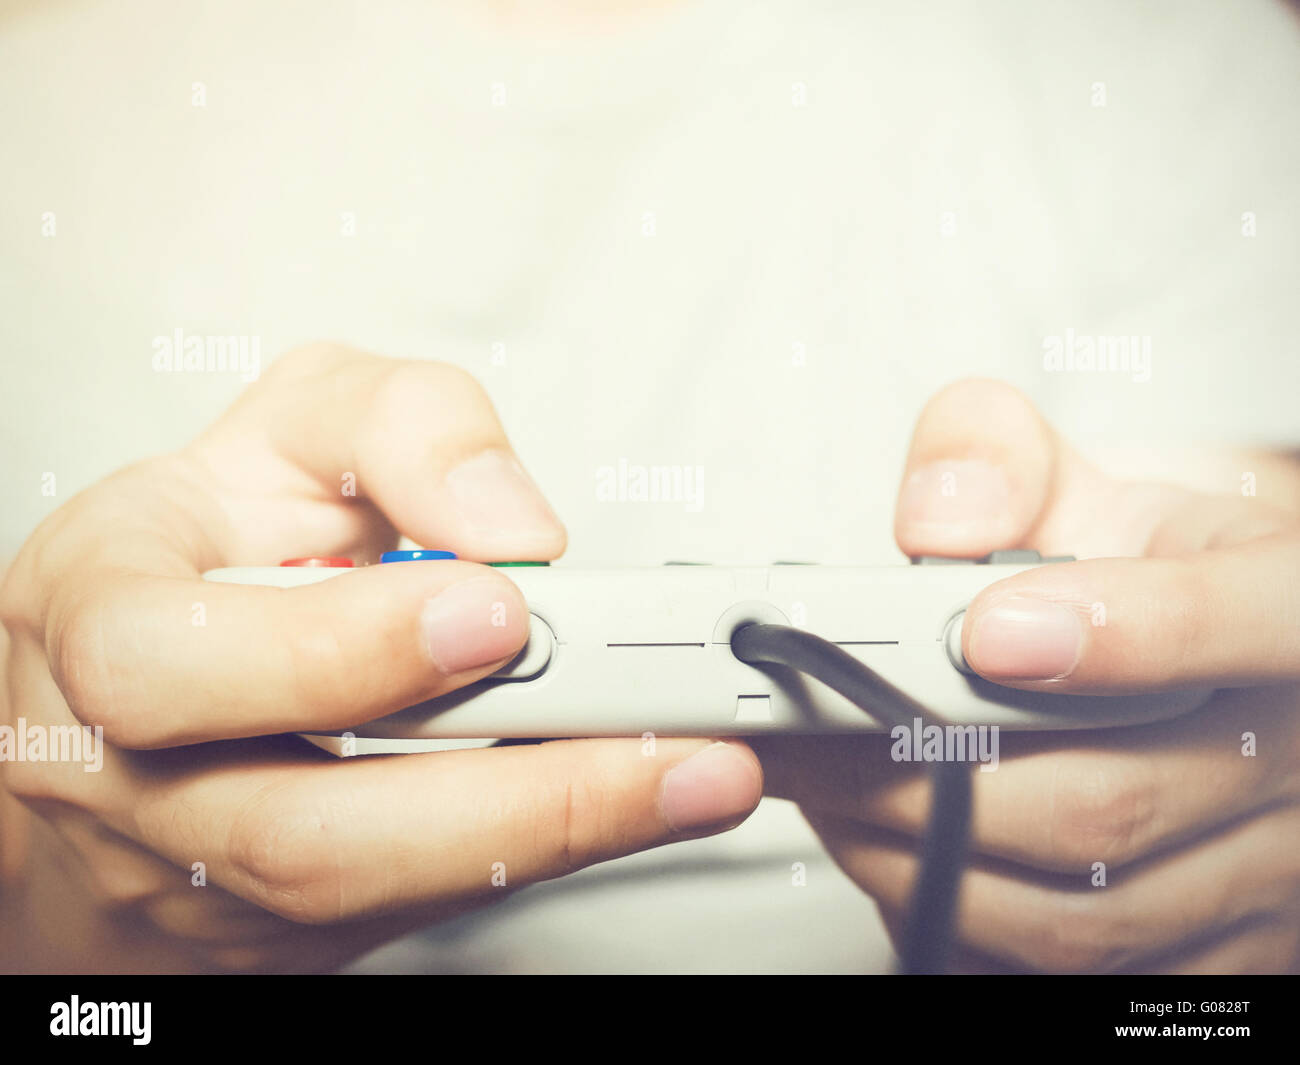 A young man holding game controller playing video games (vintage tone) Stock Photo